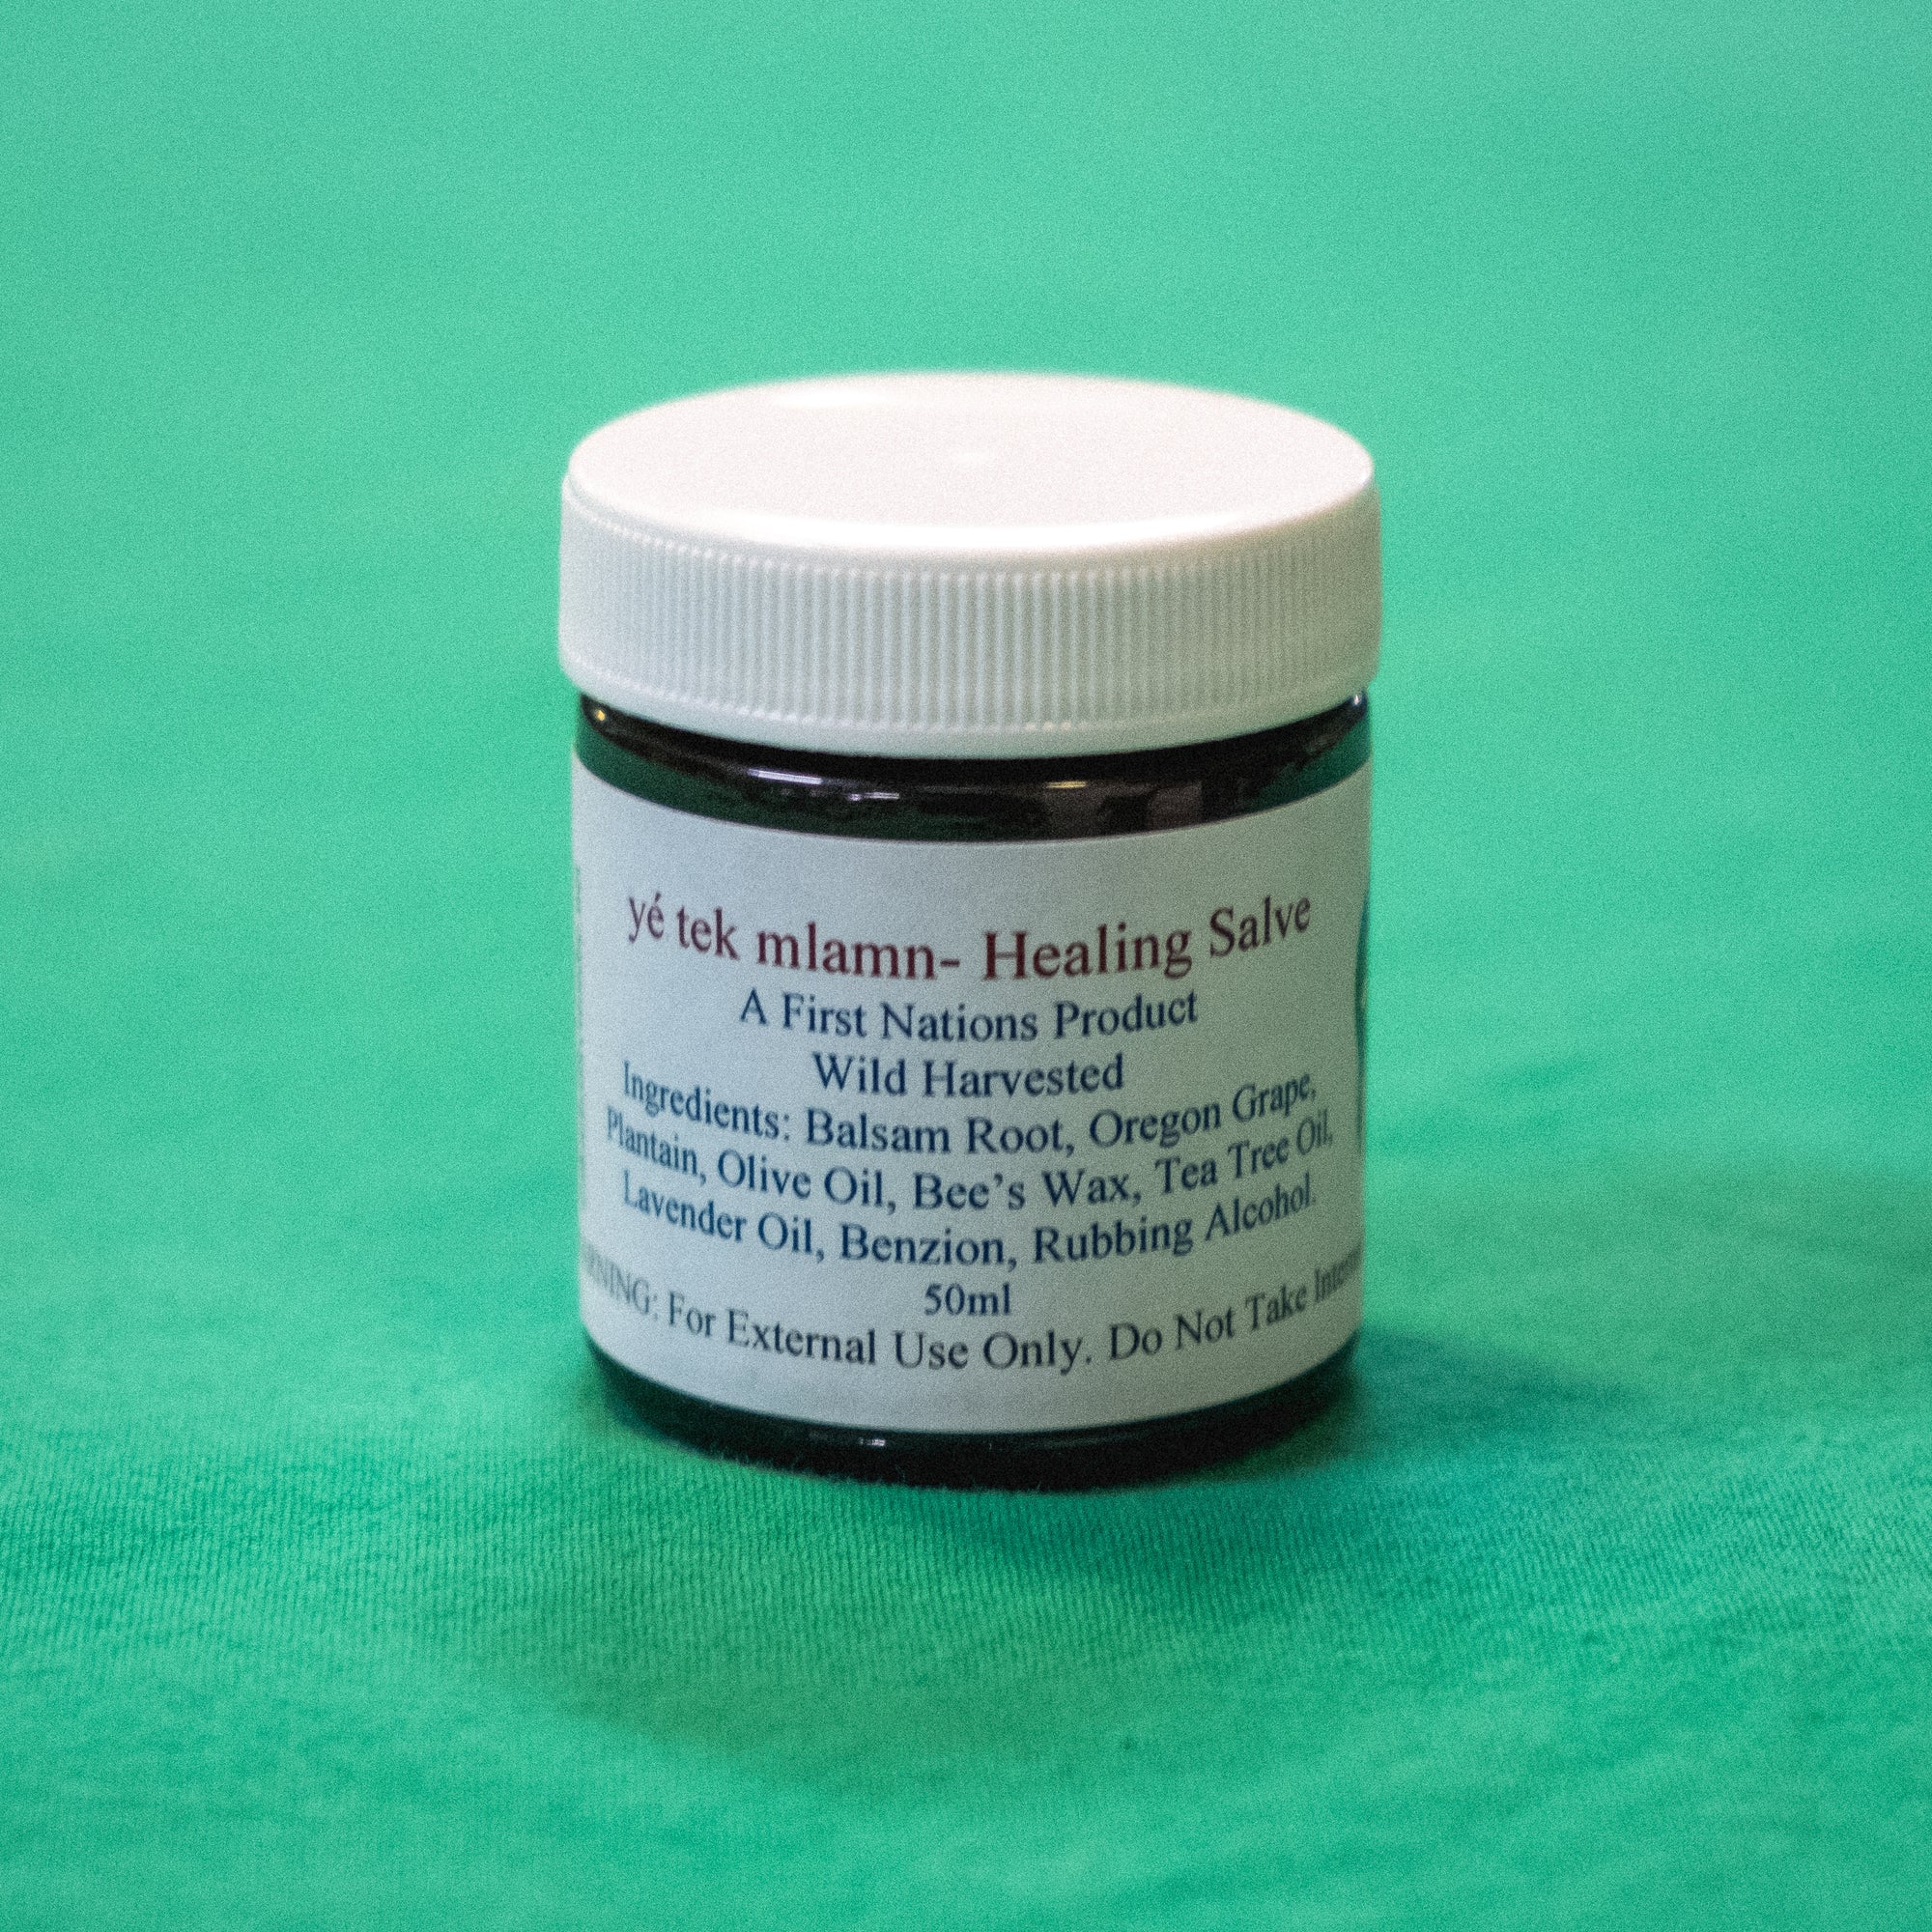 A jar with a label that says "yé tek mlamn - Healing Salve. A First Nations Product. Wild Harvested. Ingrediants: Balsam Root, Organ Grape, Plantain, Olive Oil, Bee's Wax, Tea Tree Oil, Lavendar Oil, Bezion, Rubbing Alcohol. 50ml. Warning For External Use Only. Do not take internally." End of image description.